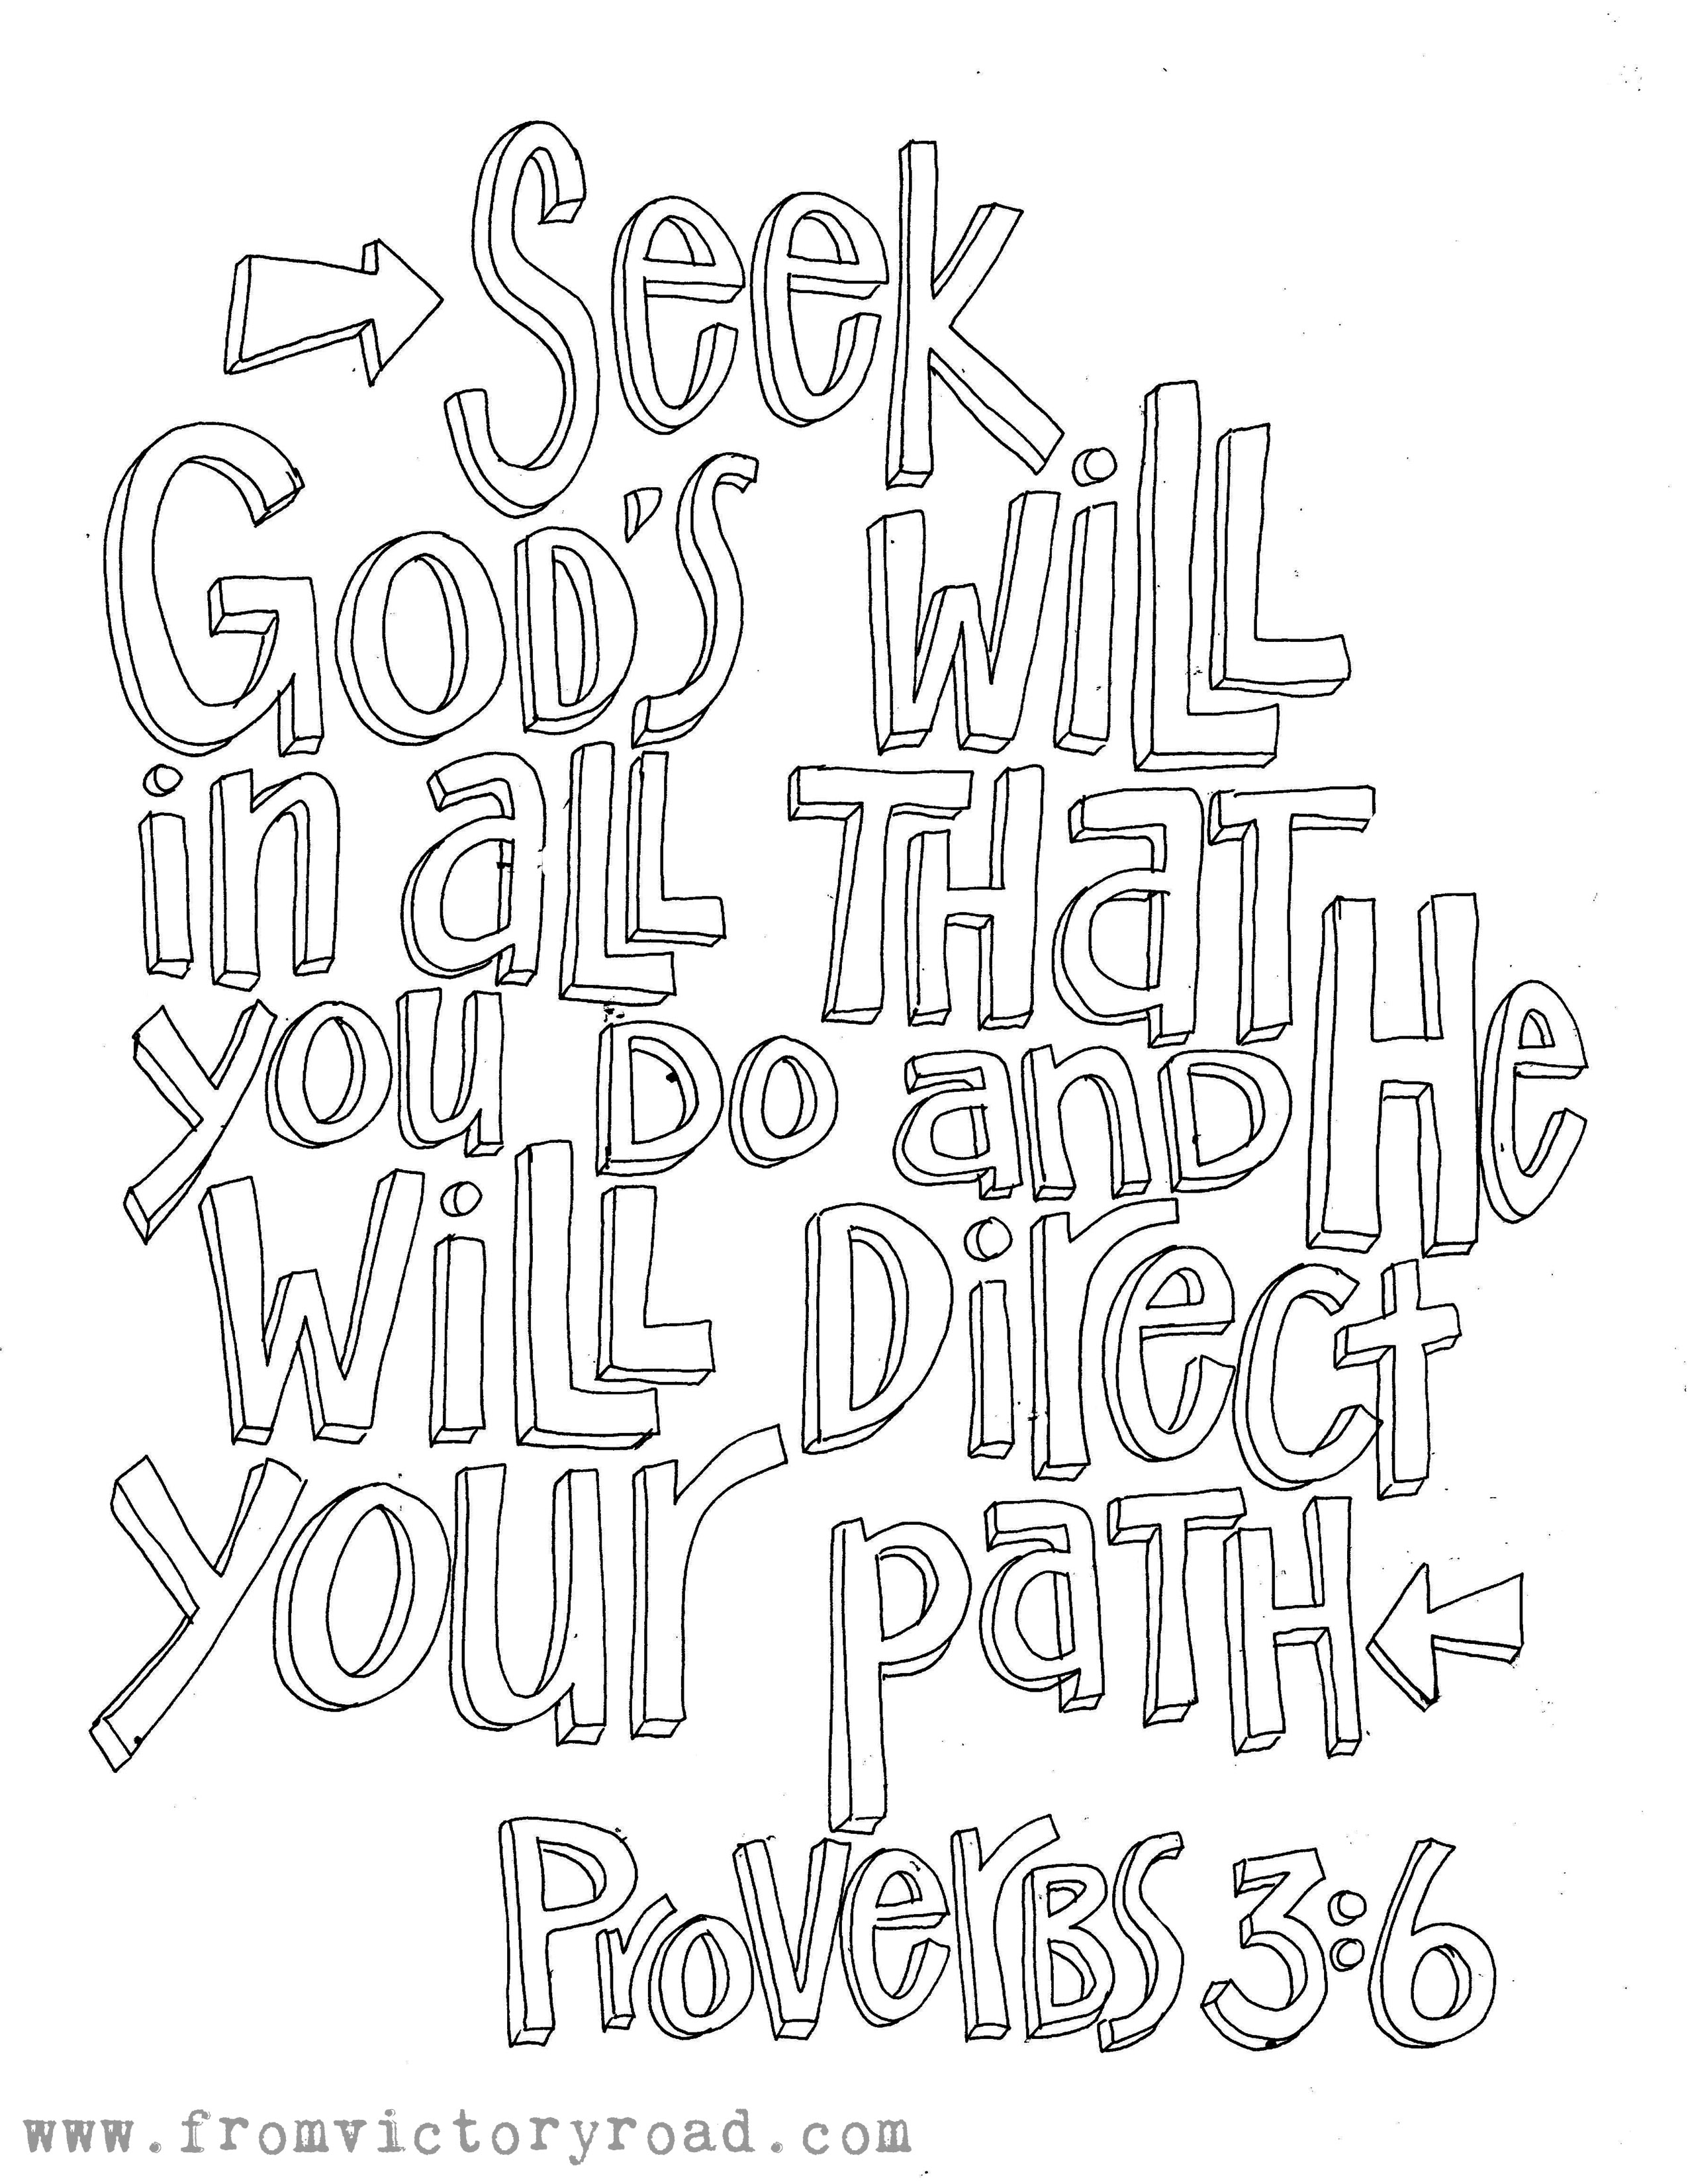 proverbs-3-5-6-coloring-sheet-coloring-pages